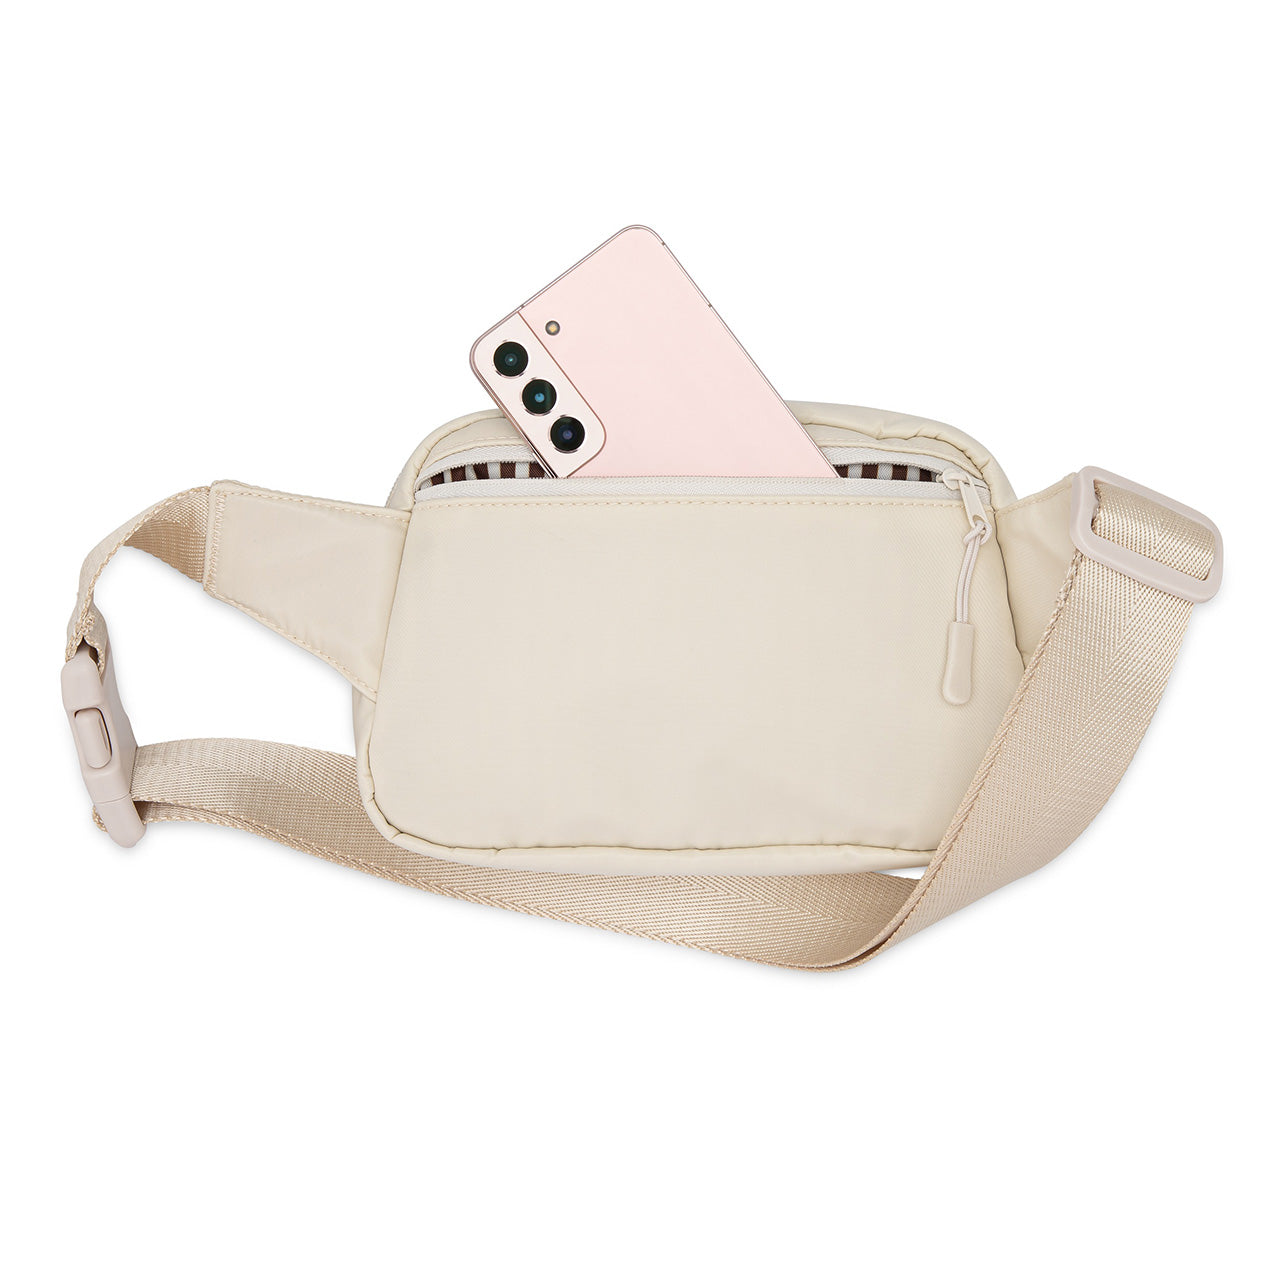 Cream Belt bag with secure zippered pocket on the outside